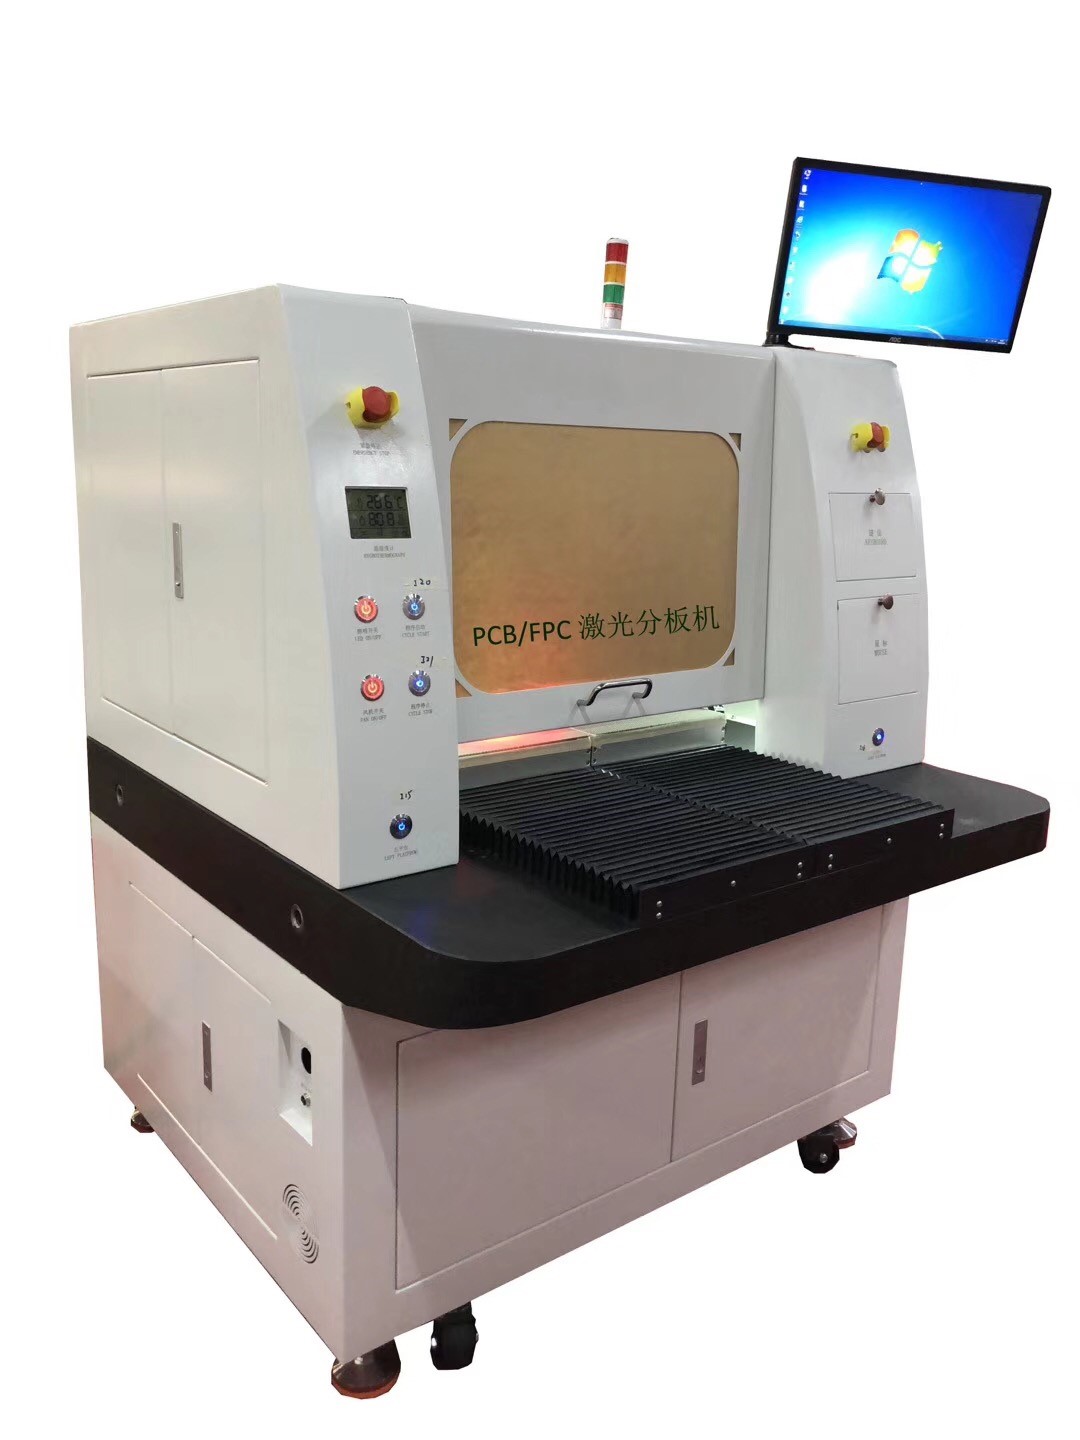 PCB Boards circuit Cutter,PCB Boards printing Cutter- Buy Cnc Pcb Router,Pcb Routing,Cnc Router Machine Product on pcb-router.com